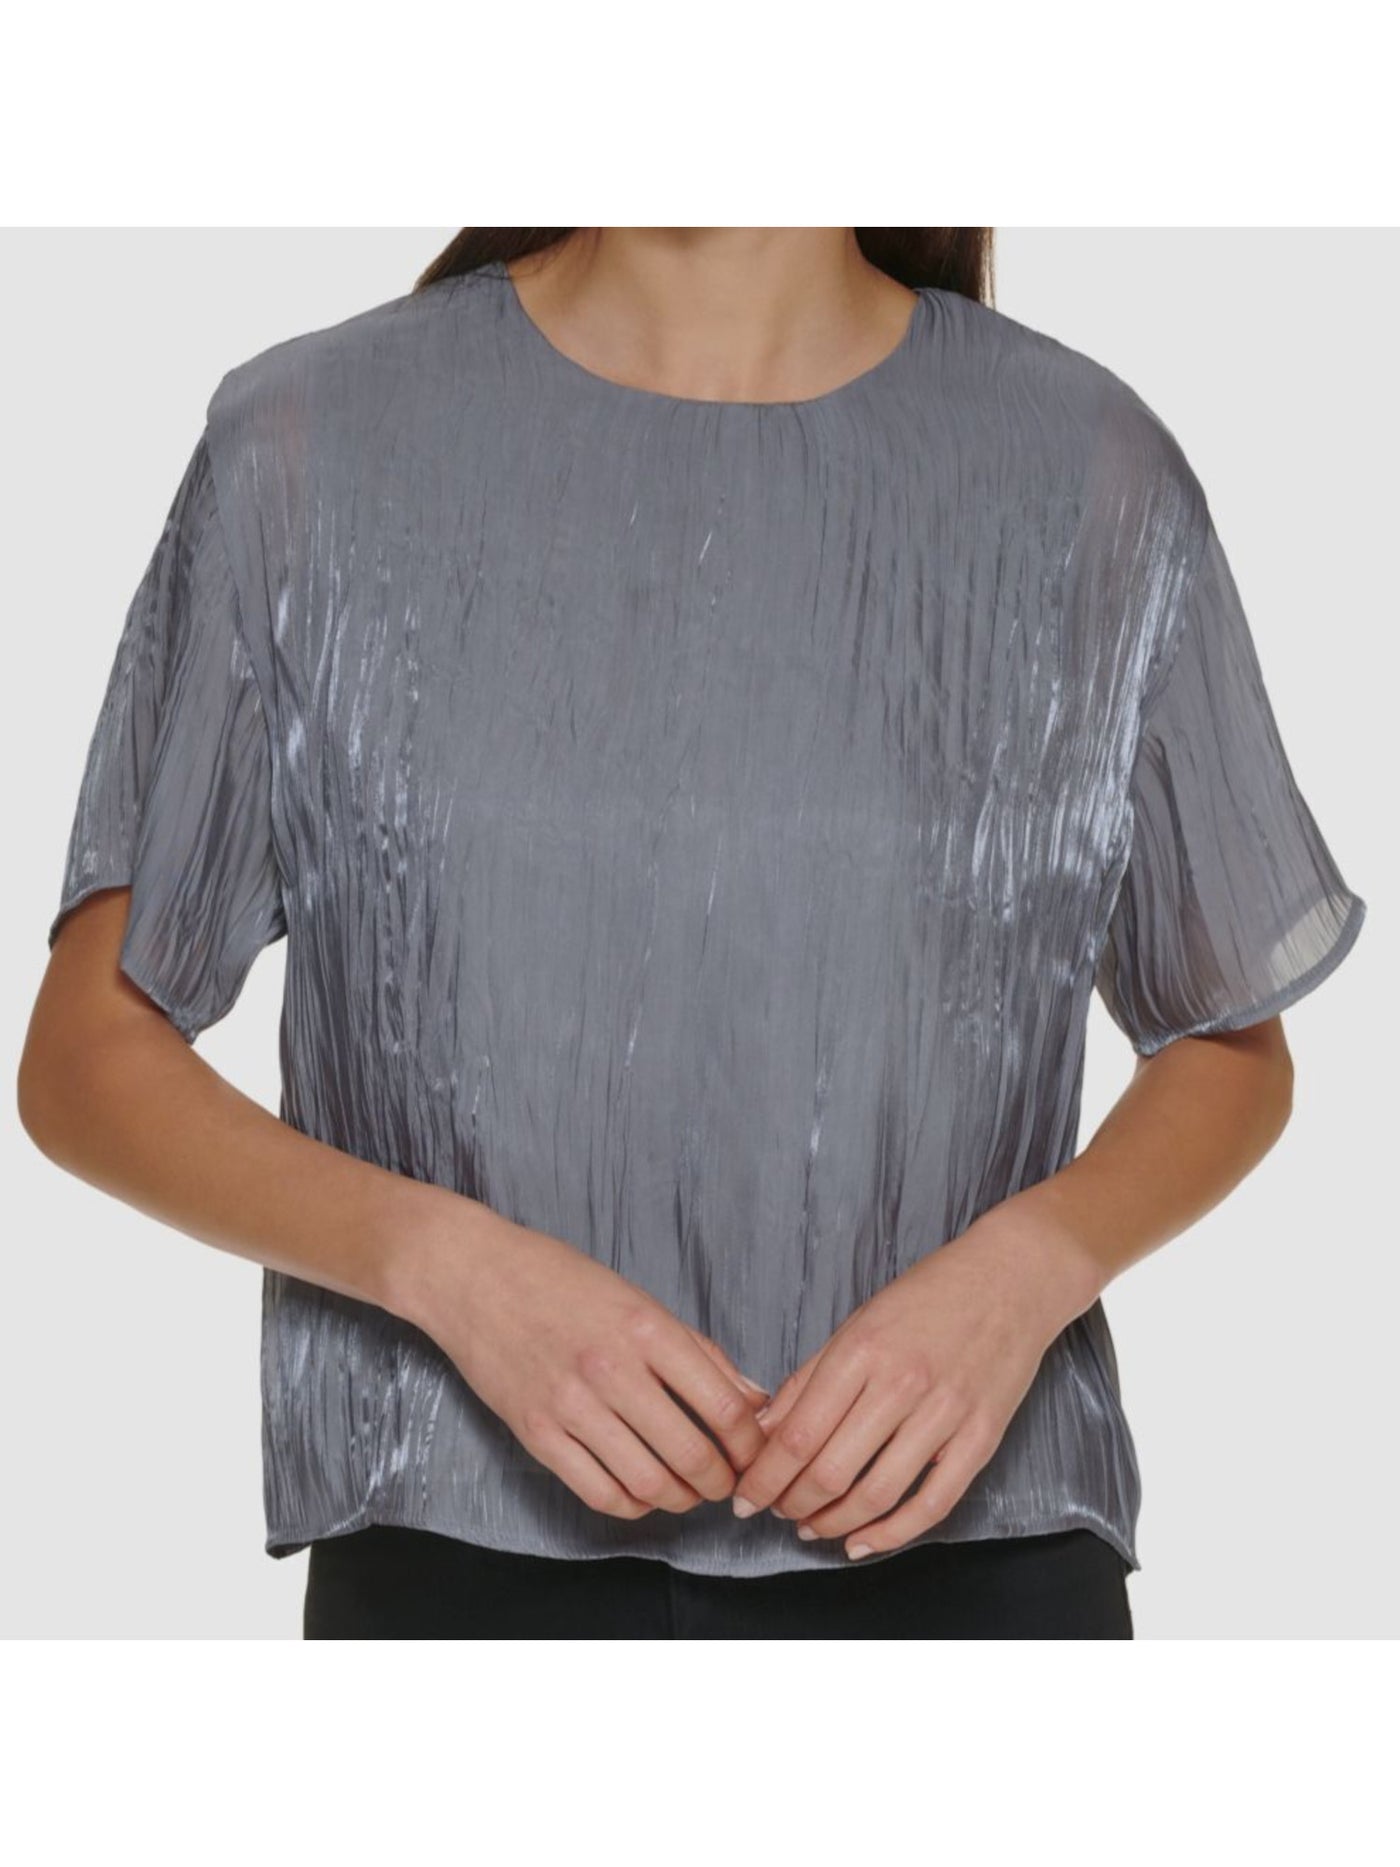 CALVIN KLEIN Womens Gray Metallic Lined Back Button Keyhole Crinkle Short Sleeve Crew Neck Party Top XS